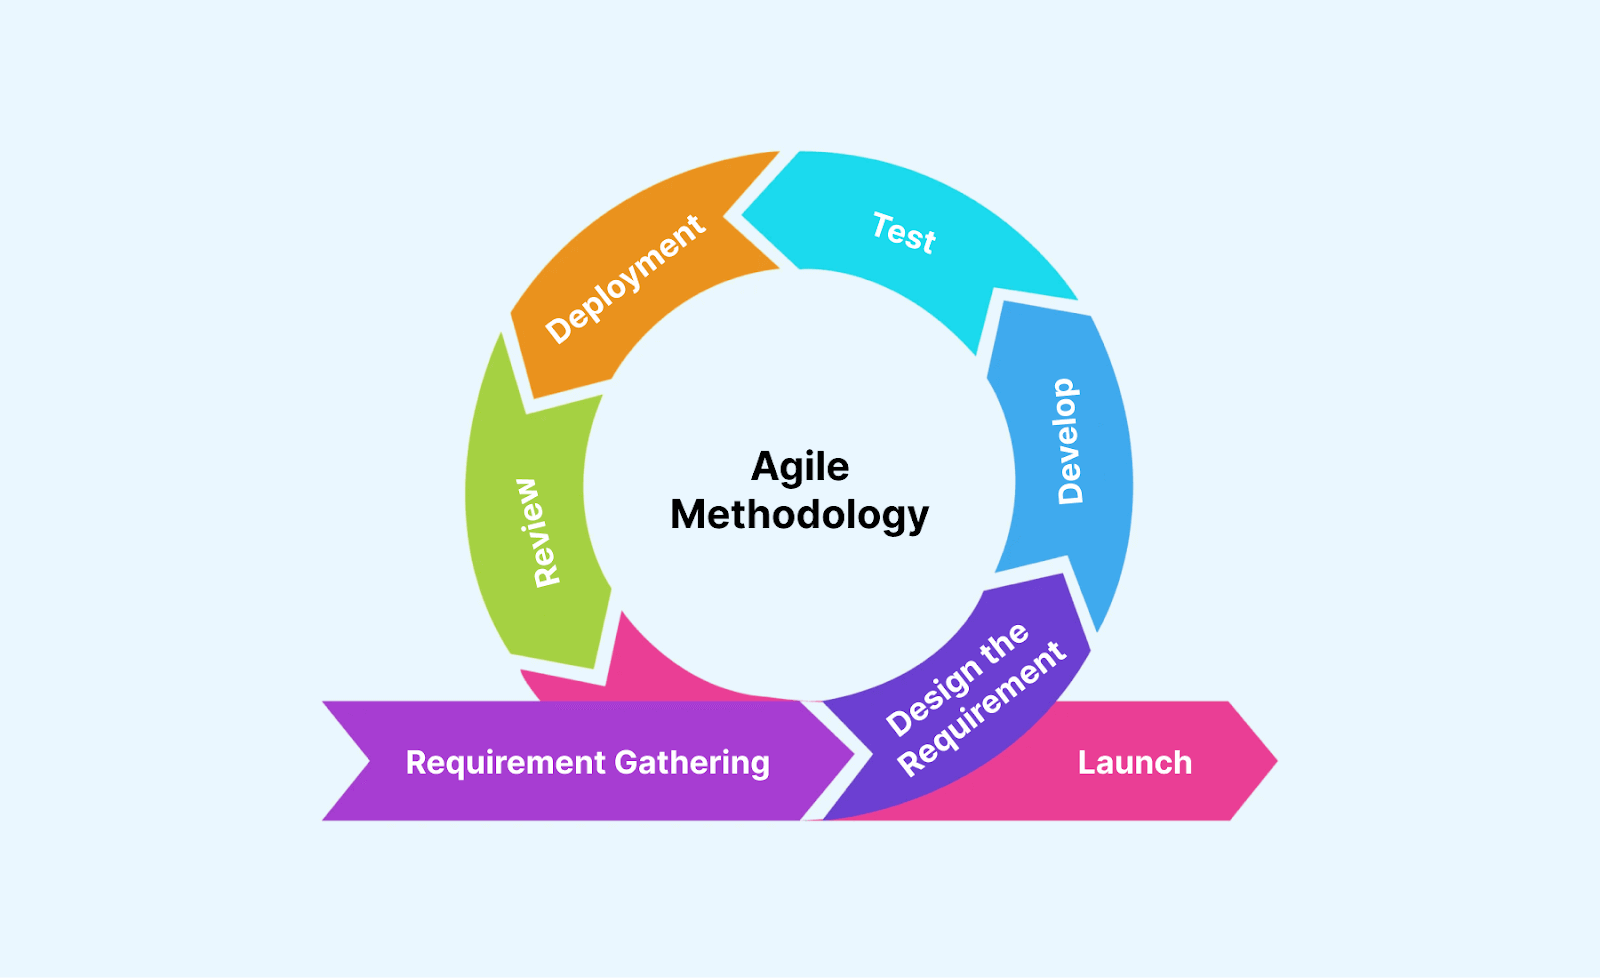 Phases of the Agile SDLC Model